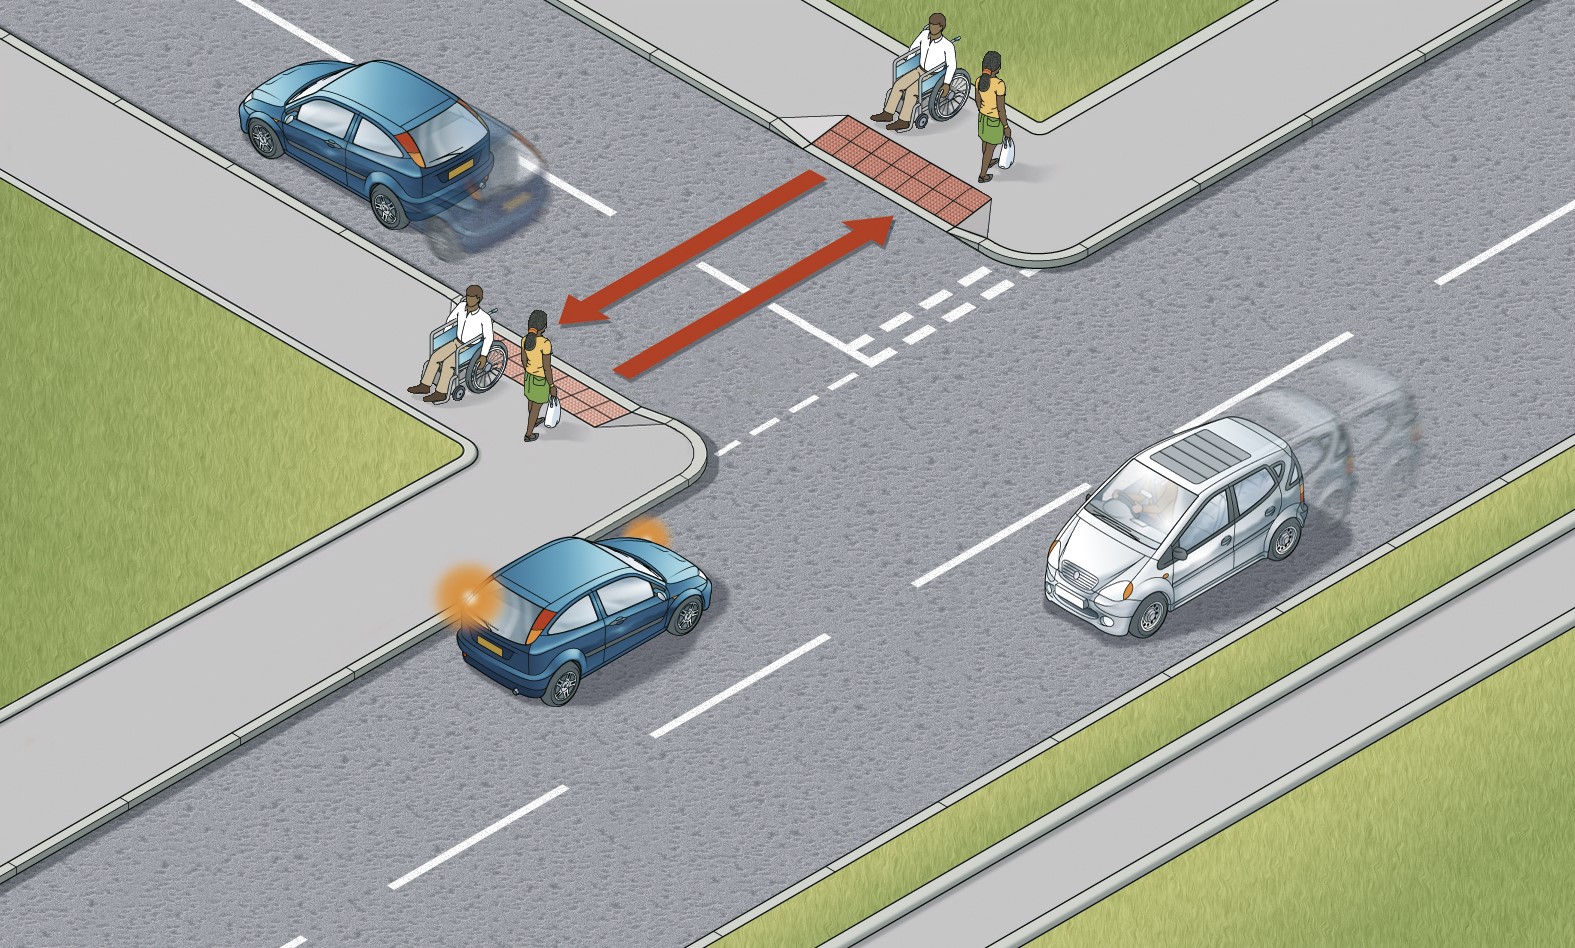 Rule H2: Wait for the pedestrian to cross the junction before turning. This applies if you are turning right or left into the junction.